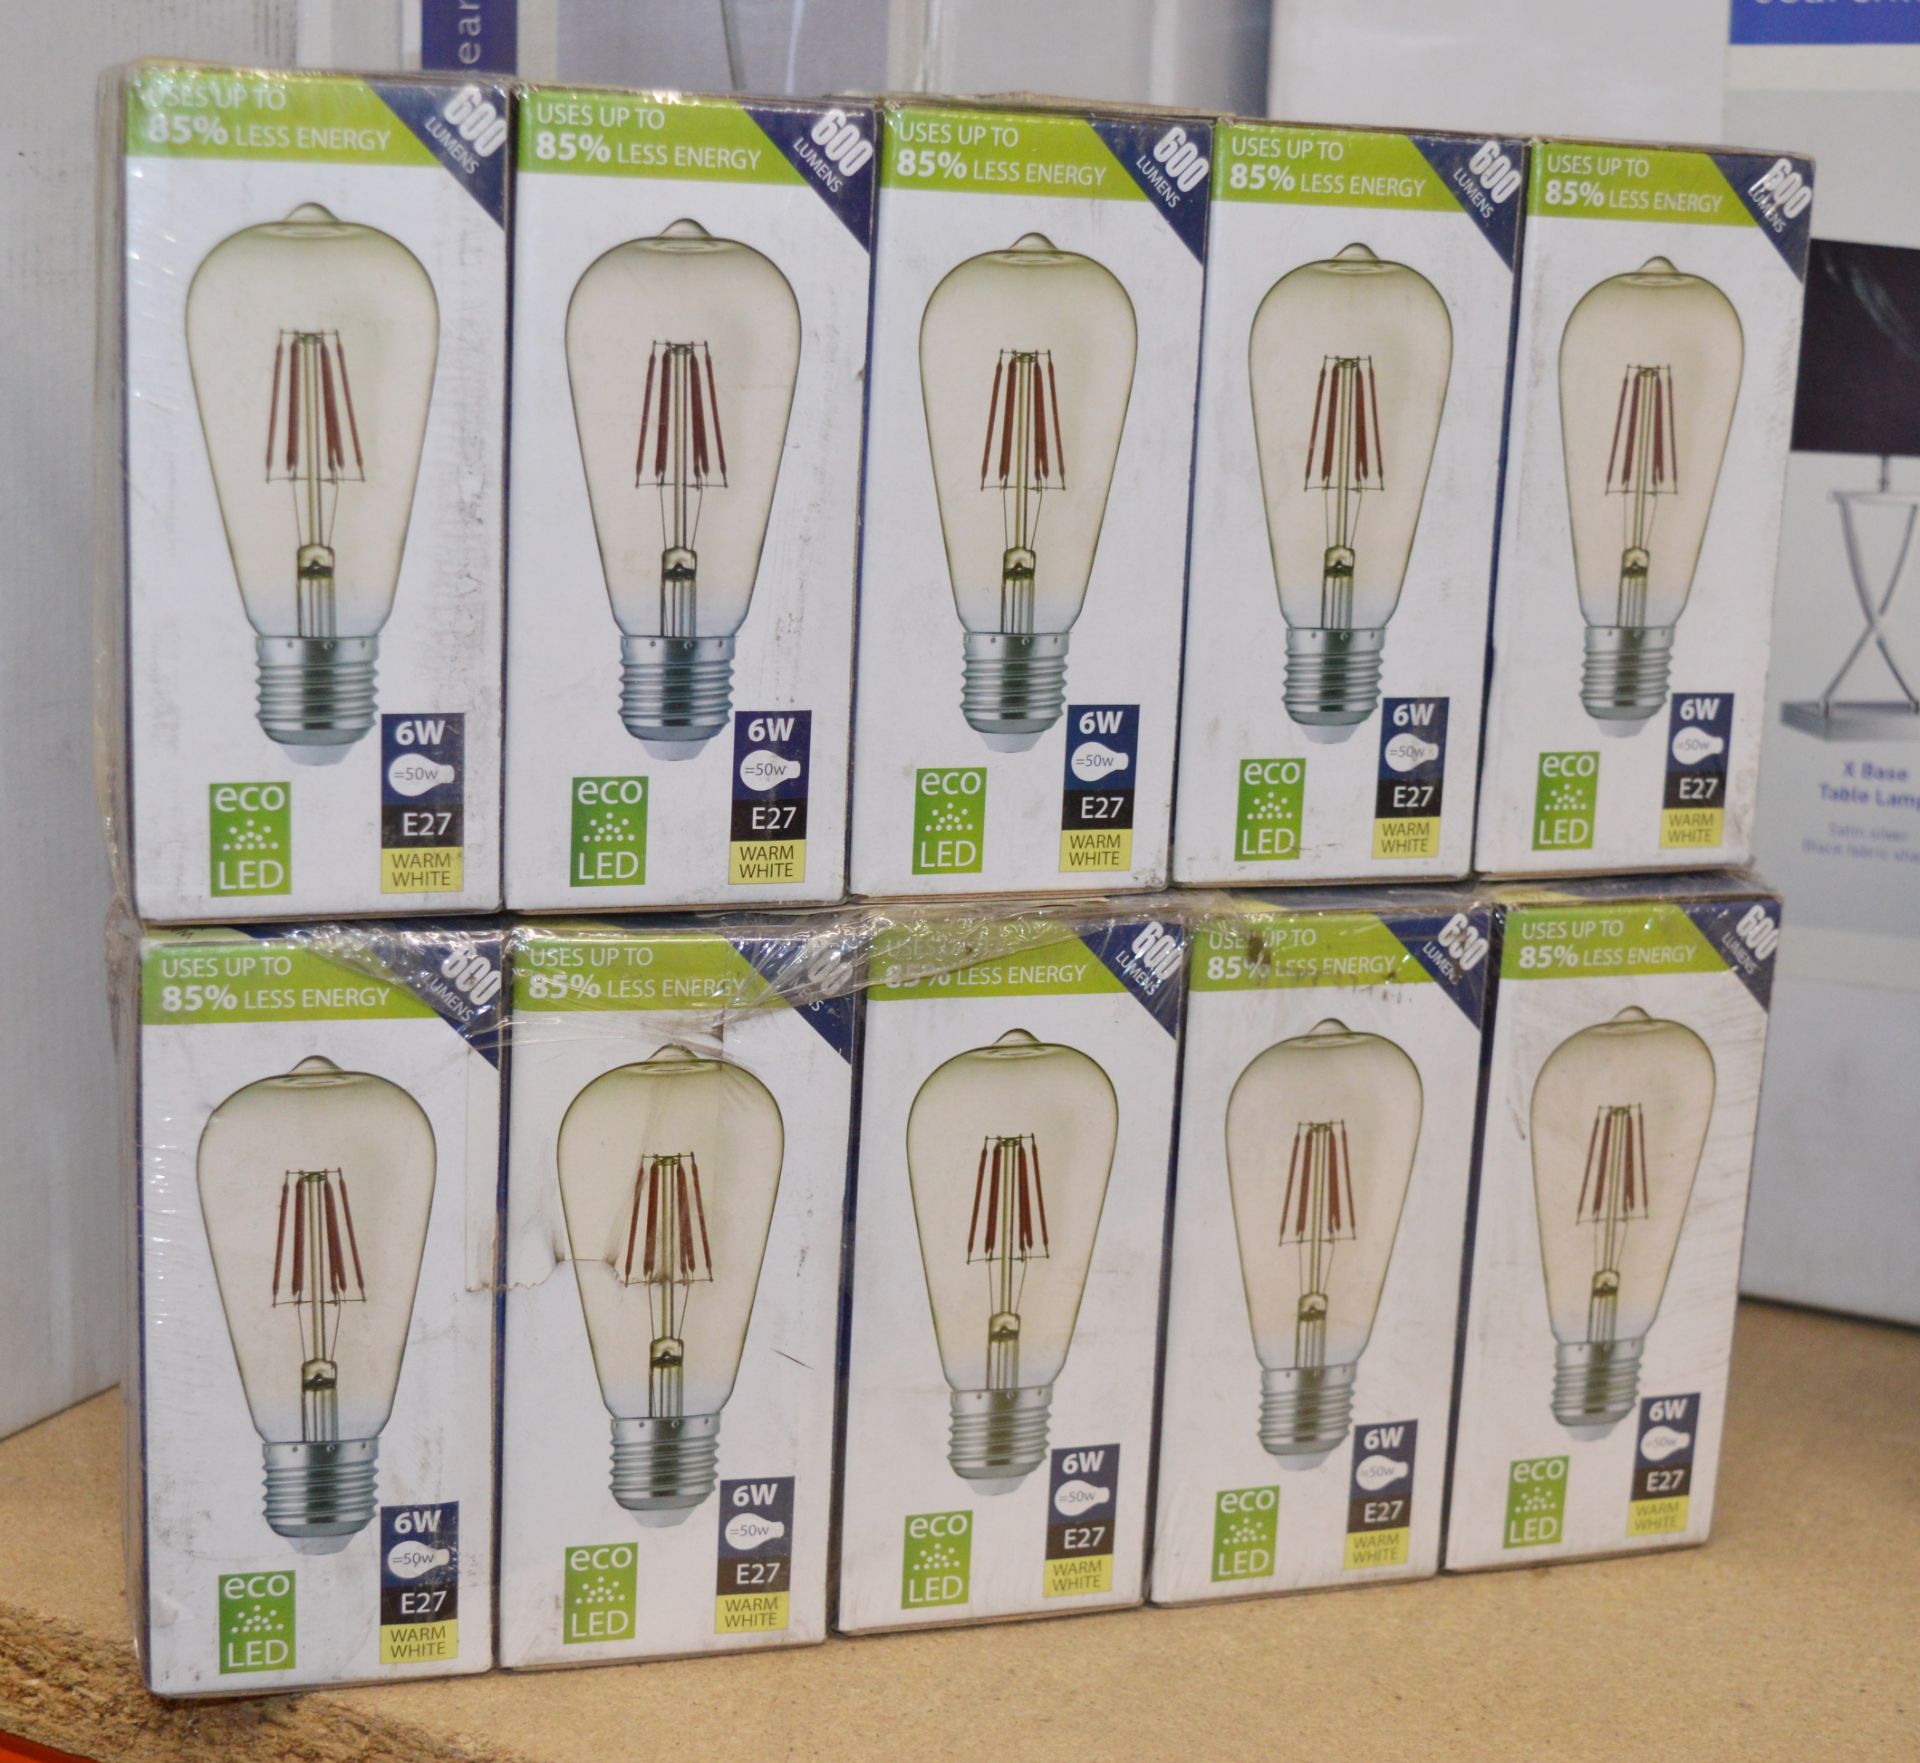 10 x EcoLed 6w E27 Warm White Light Bulbs - New Boxed Stock - CL323 - Ref: A1 - Location: Altrincham